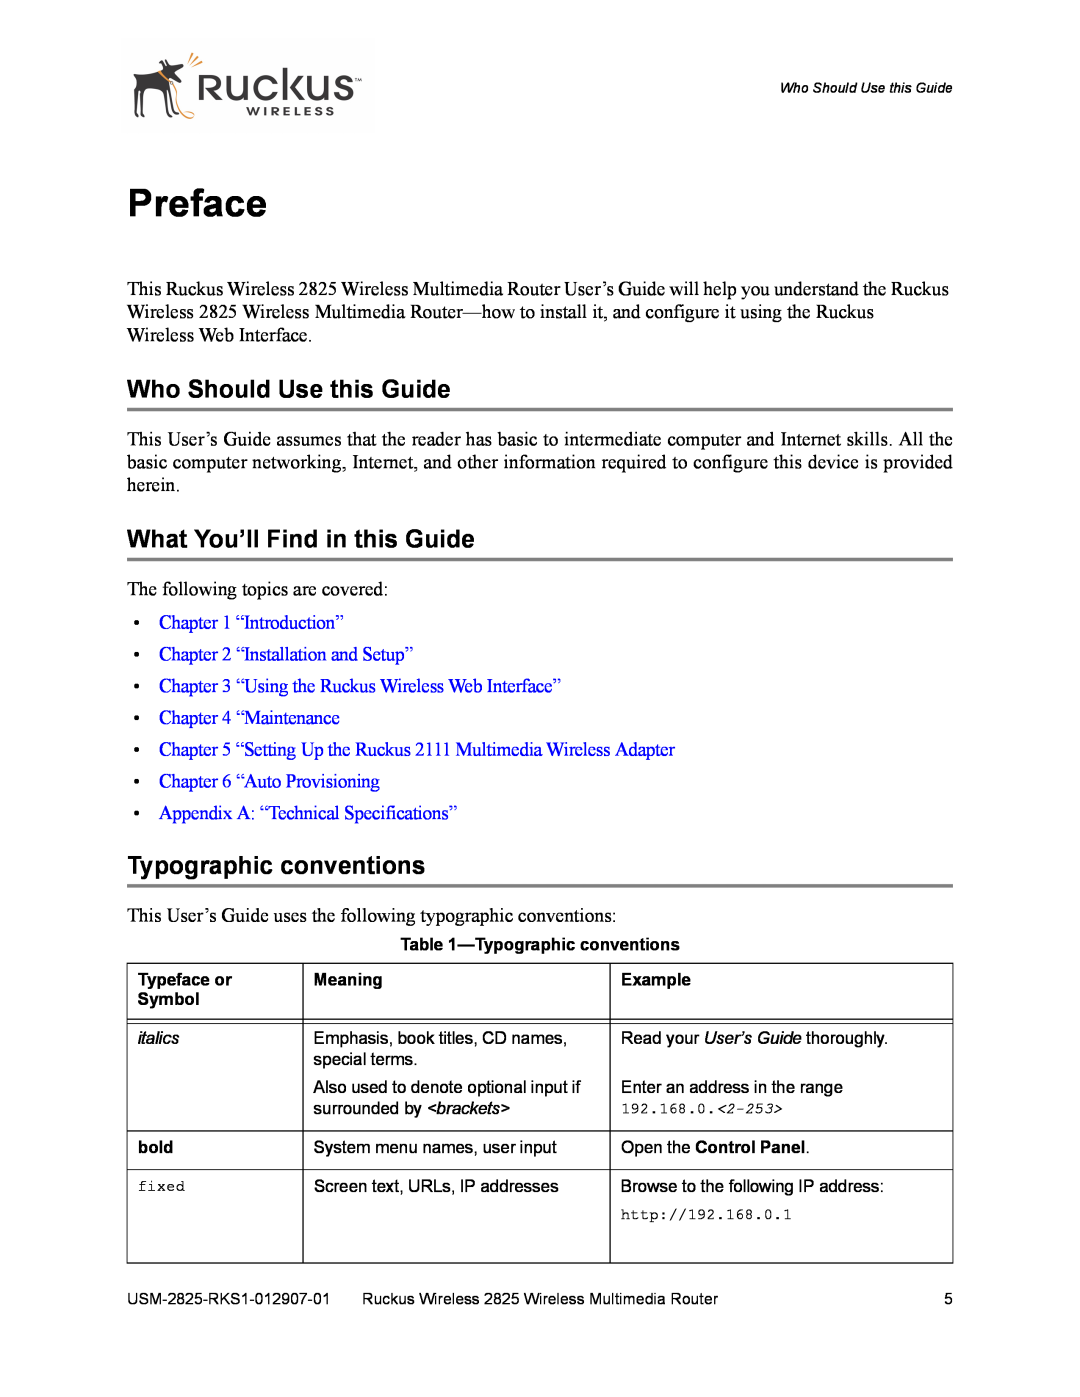 Ruckus Wireless 2111, 2825 Preface, Who Should Use this Guide, What You’ll Find in this Guide, Typographic conventions 